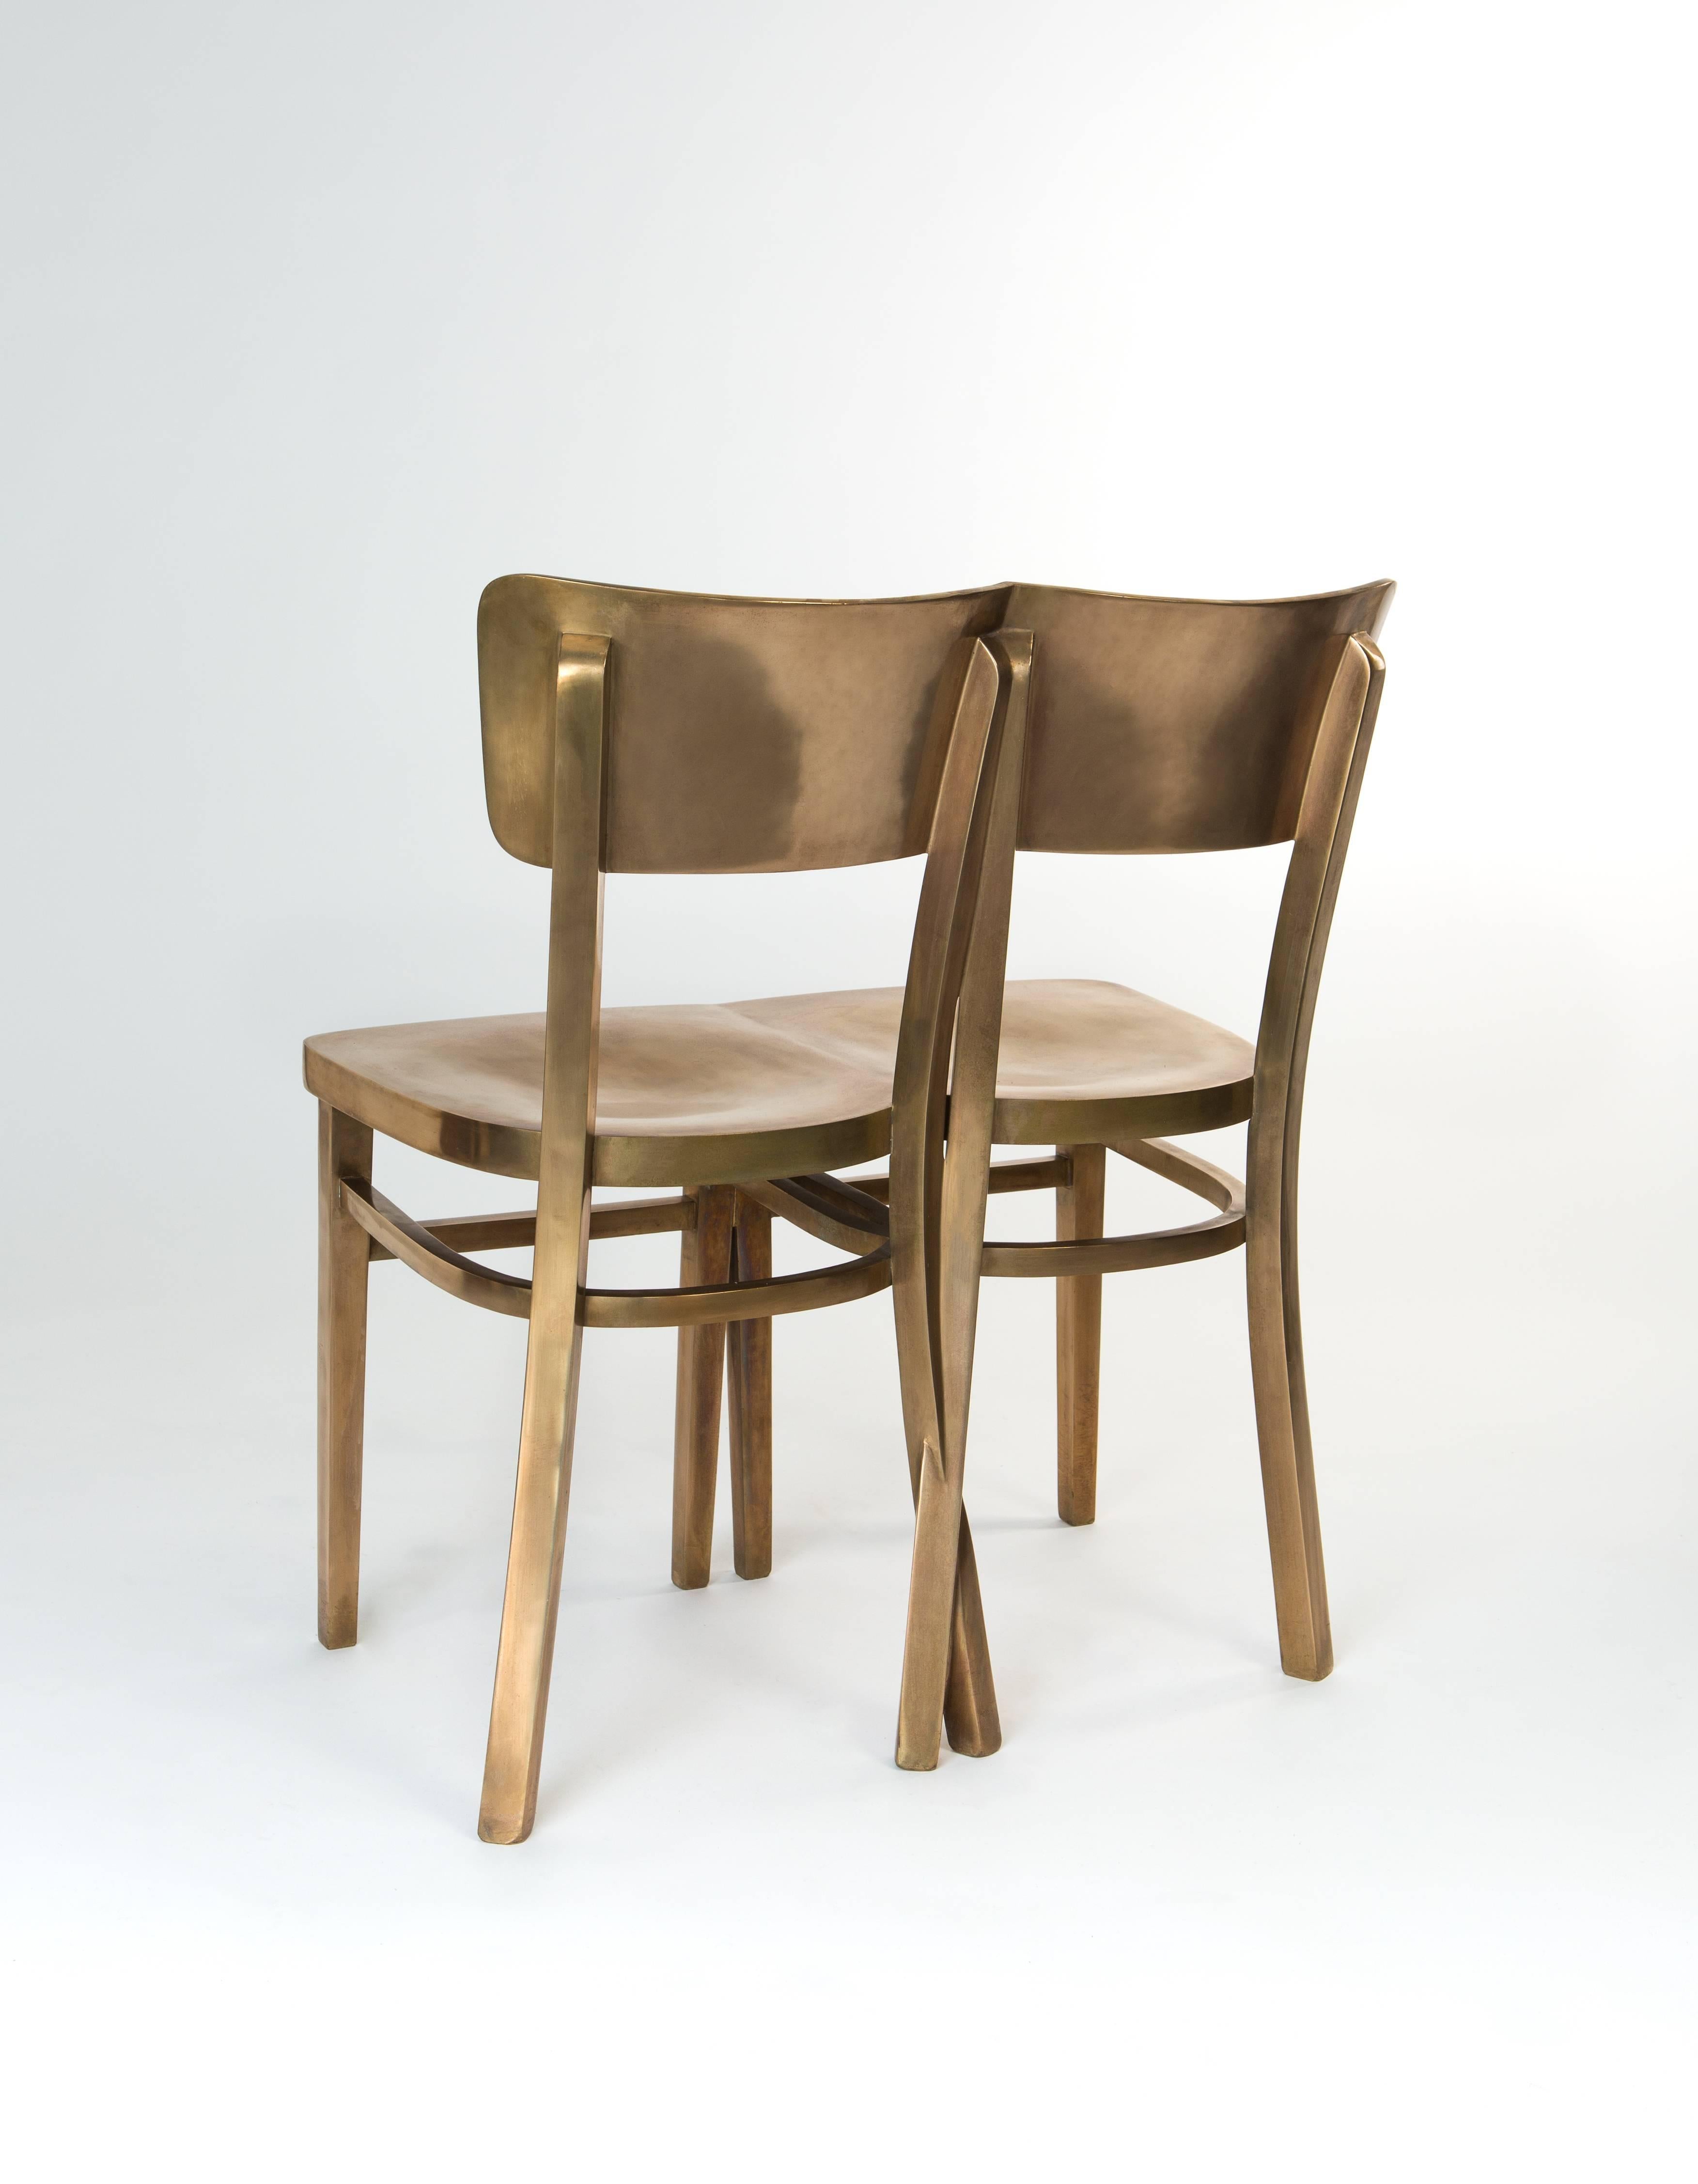 Chair made by Sofie Lachaert and Luc d'Hanis.

‘Crossed Leg Chair’ is a solid bronze chair fit for an intimate connection. The process takes two wooden chairs carved and attached side by side with their back legs intertwined before immersing them in